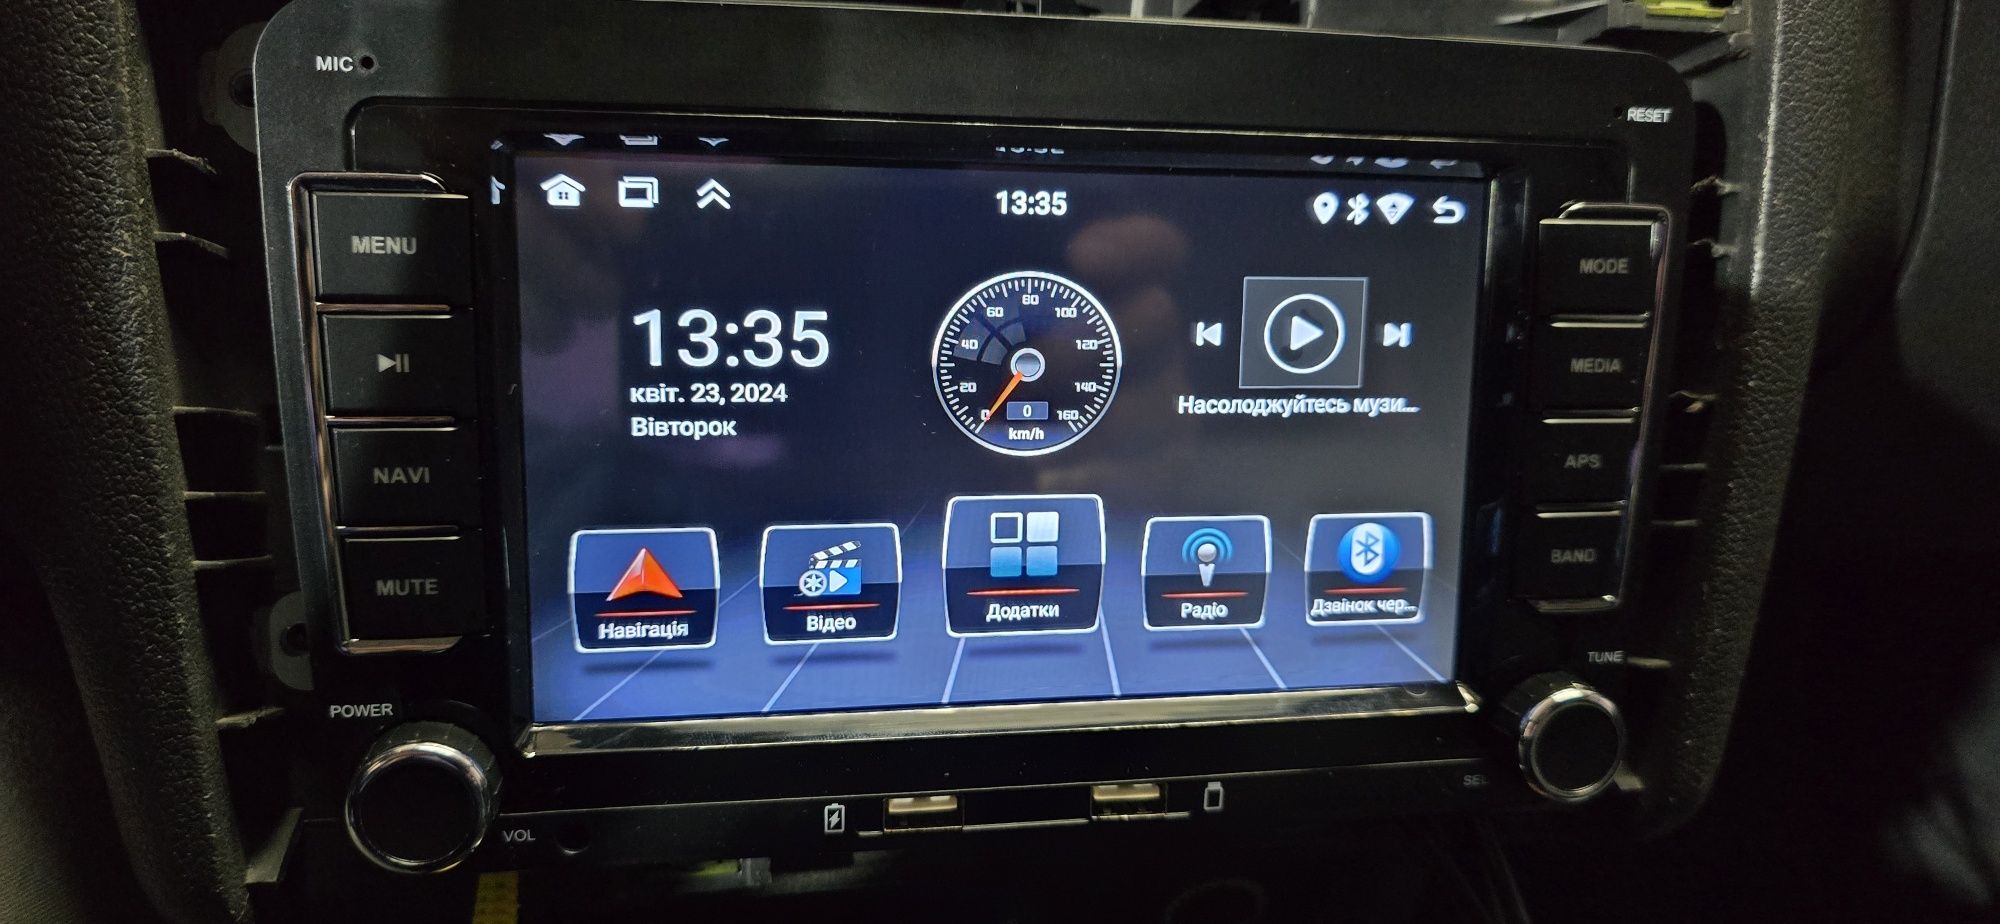 2din vw android.